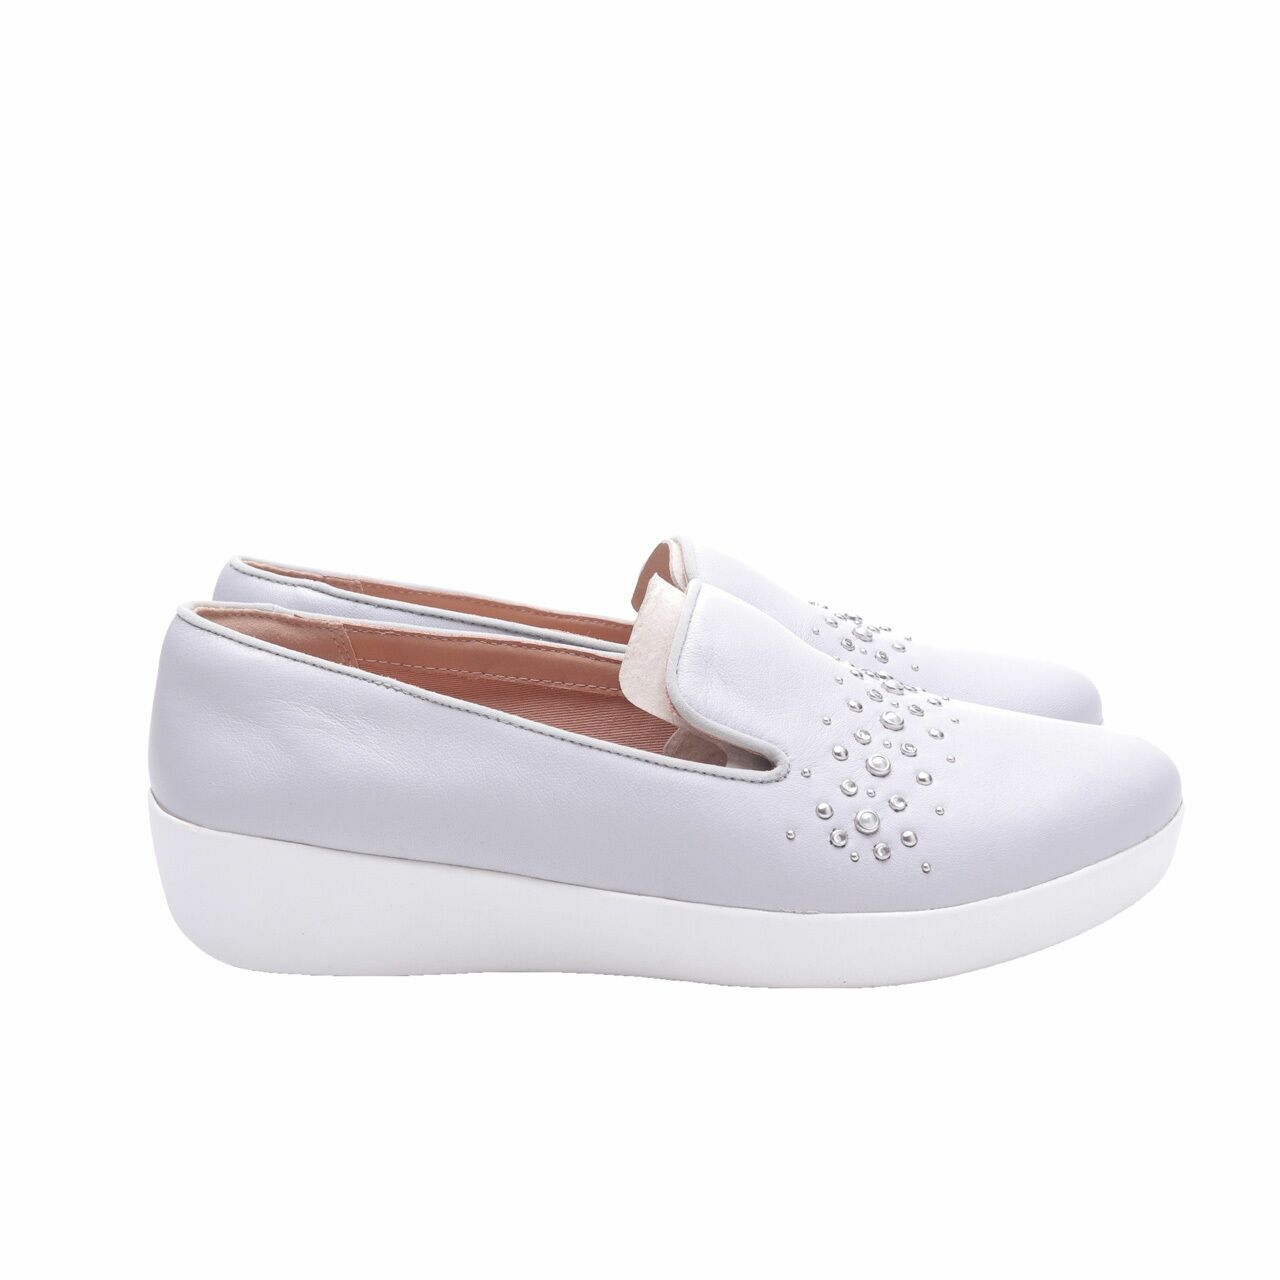 Fitflop Audrey Pearl Stud Smoking Slippers Flats